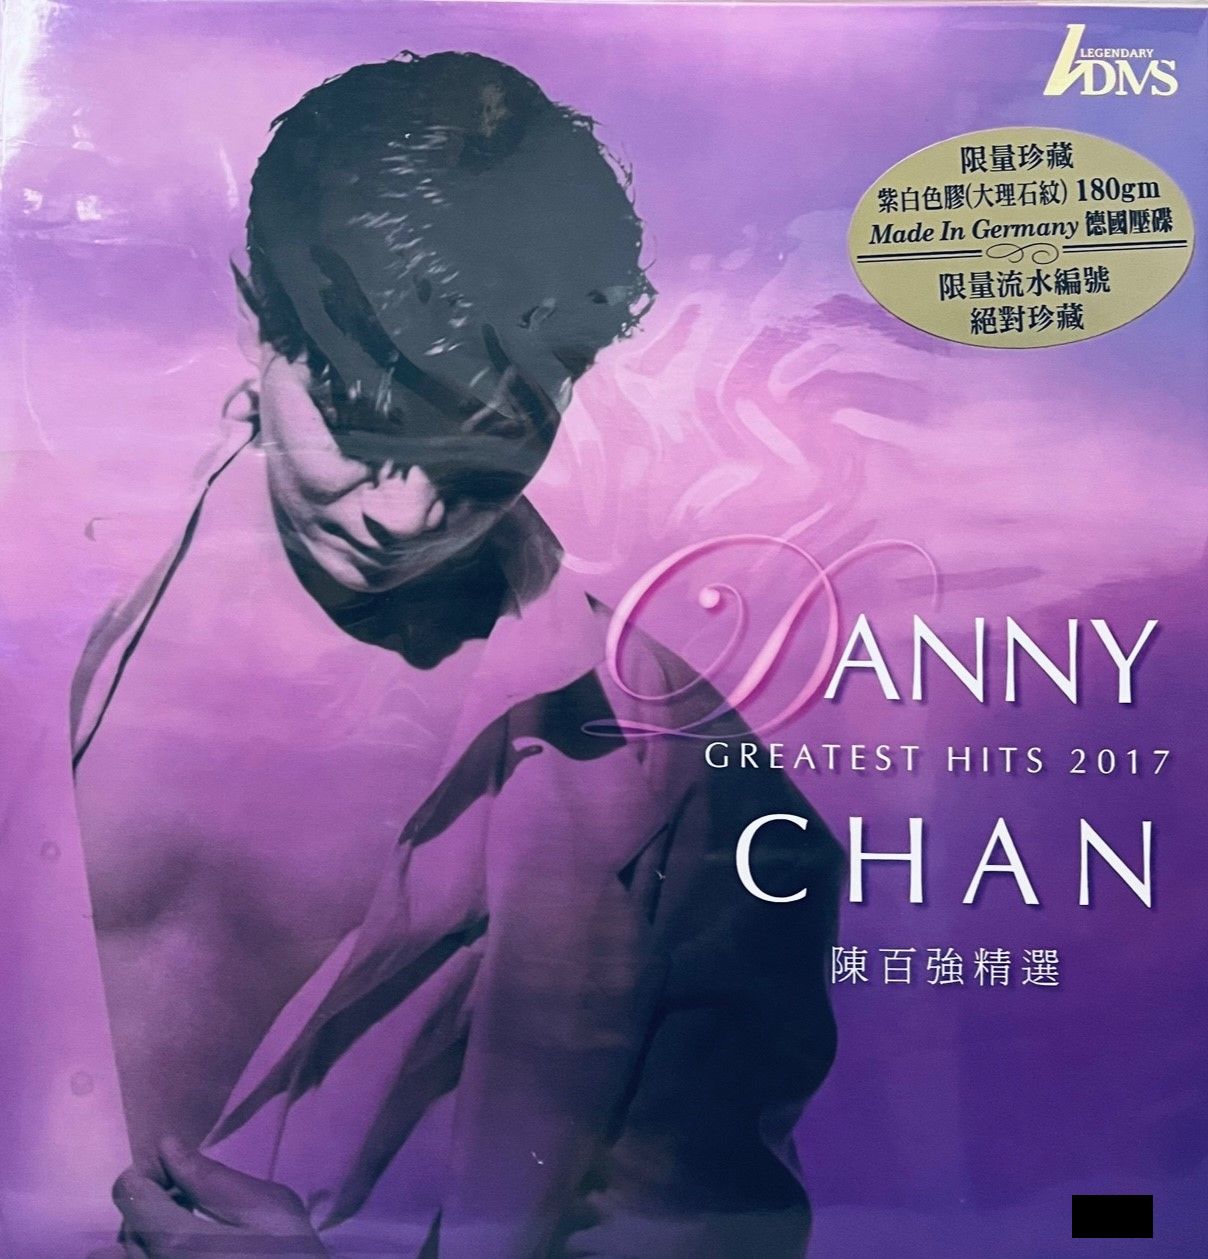 DANNY CHAN - 陳百強 GREATEST HITS 2017 紫白膠 ADMS (COLORED  VINYL)  MADE IN GERMANY